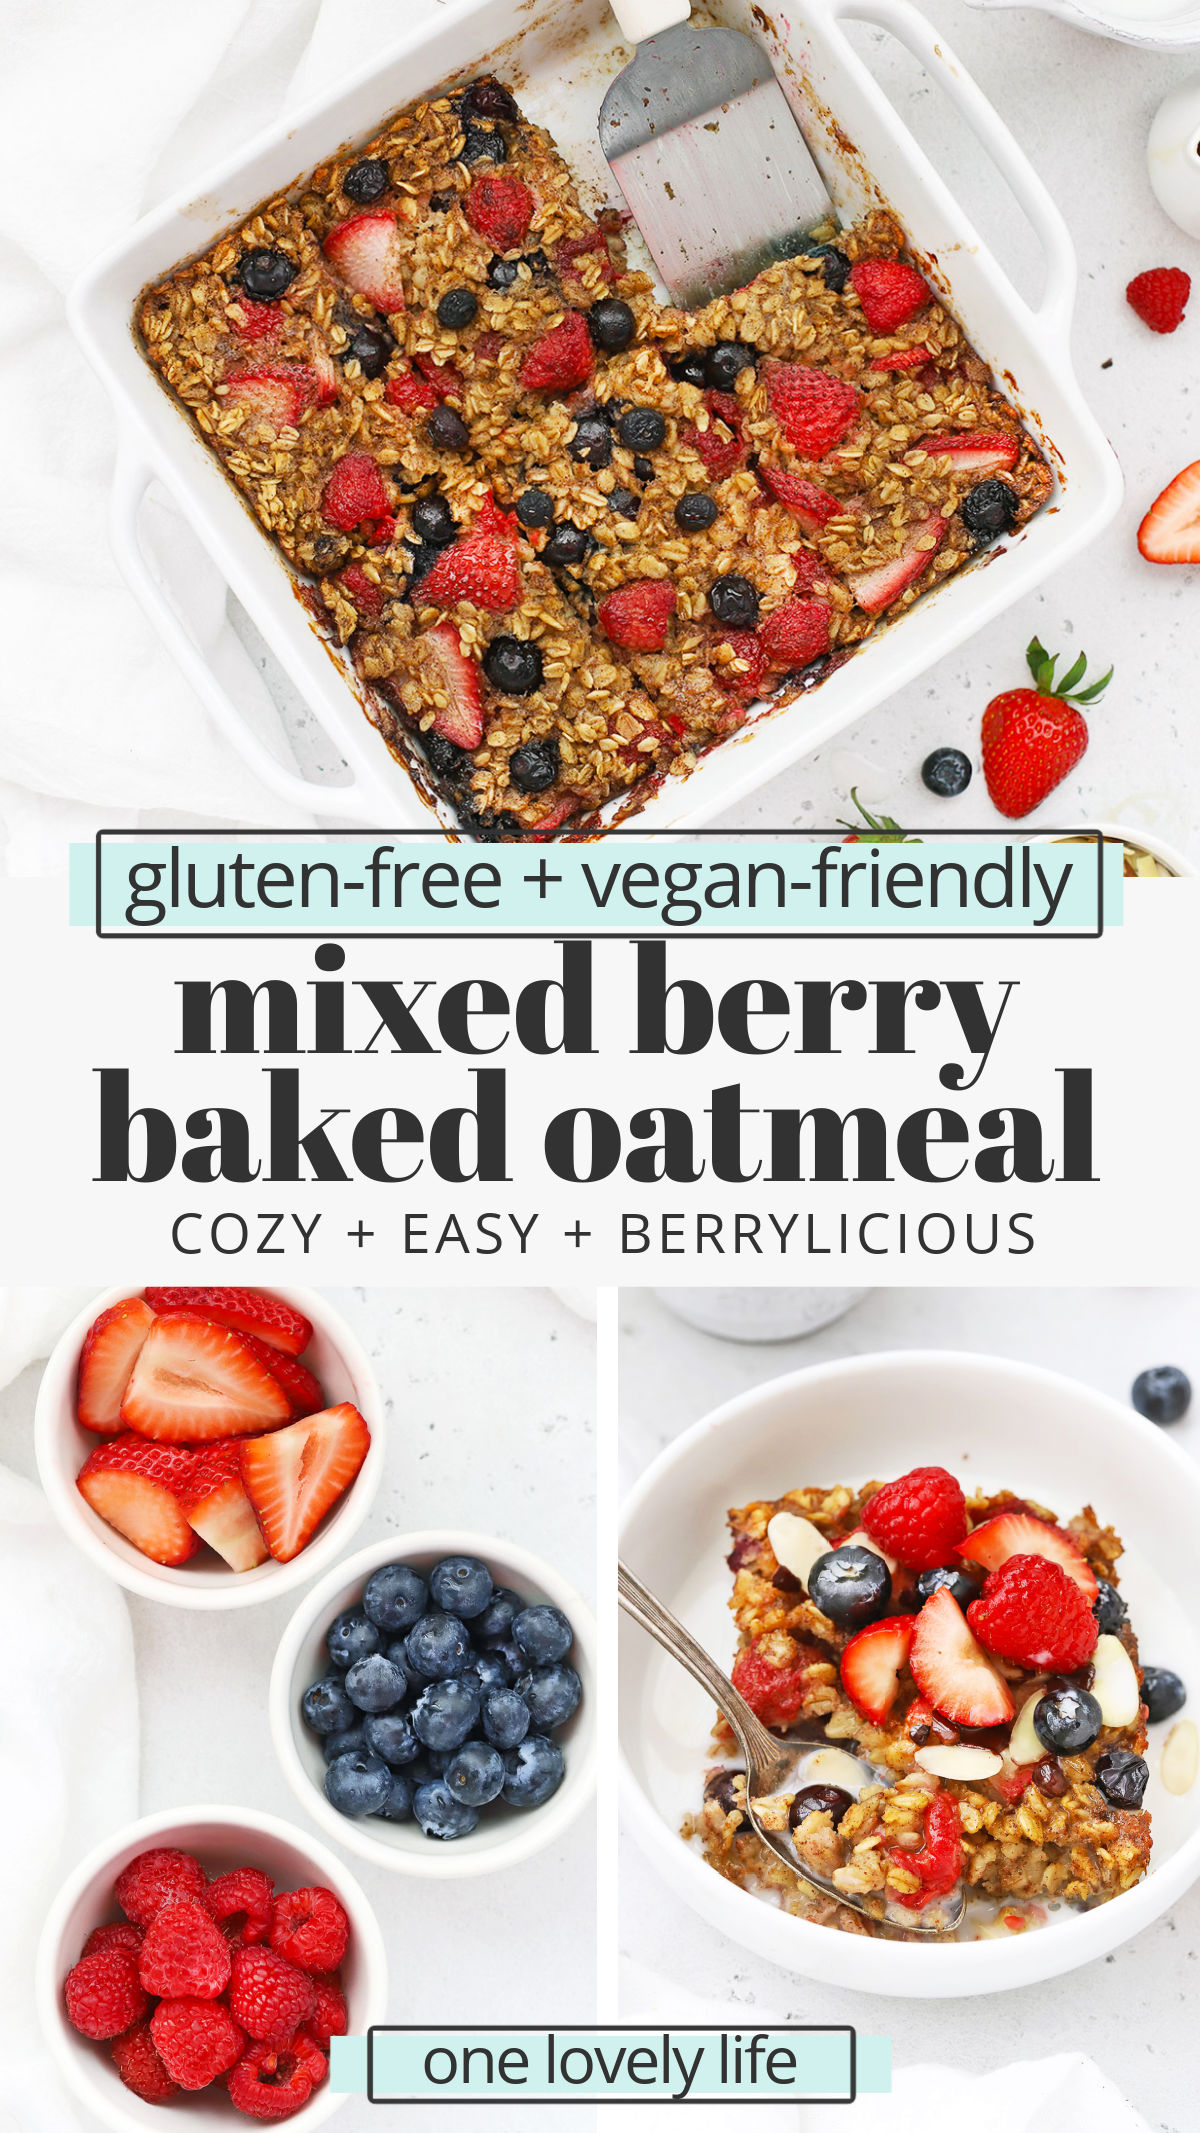 Mixed Berry Baked Oatmeal! This triple berry baked oatmeal recipe is a delightful healthy meal prep breakfast perfect for a crowd. (Gluten-Free, Vegan-Friendly) // Healthy Berry Baked Oatmeal // Vegan Berry Baked Oatmeal // Gluten-Free Berry Baked Oatmeal // Meal Prep Breakfast Recipe // Baked Oatmeal Recipe // Spring Breakfast #glutenfree #bakedoatmeal #berries #oatmeal #vegan